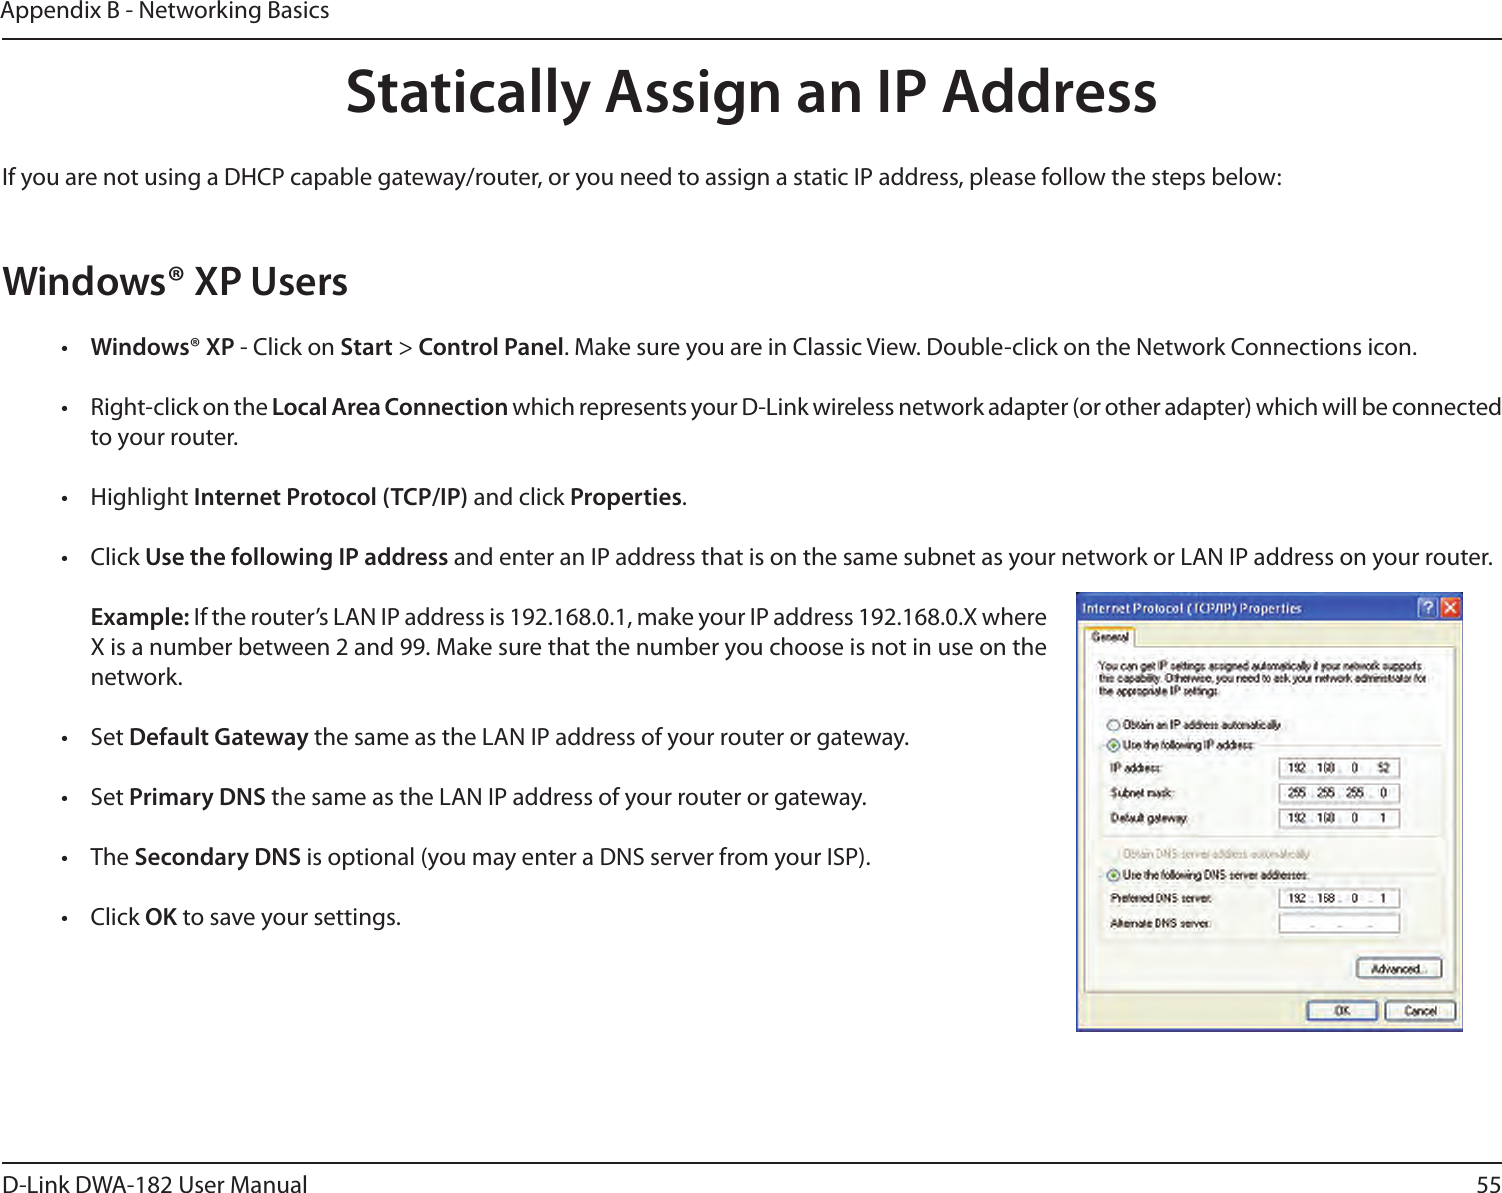 55D-Link DWA-182 User ManualAppendix B - Networking BasicsStatically Assign an IP AddressIf you are not using a DHCP capable gateway/router, or you need to assign a static IP address, please follow the steps below:Windows® XP Users•  Windows® XP - Click on Start &gt; Control Panel. Make sure you are in Classic View. Double-click on the Network Connections icon.•  Right-click on the Local Area Connection which represents your D-Link wireless network adapter (or other adapter) which will be connected to your router.•  Highlight Internet Protocol (TCP/IP) and click Properties.•  Click Use the following IP address and enter an IP address that is on the same subnet as your network or LAN IP address on your router. Example: If the router’s LAN IP address is 192.168.0.1, make your IP address 192.168.0.X where X is a number between 2 and 99. Make sure that the number you choose is not in use on the network. •  Set Default Gateway the same as the LAN IP address of your router or gateway.•  Set Primary DNS the same as the LAN IP address of your router or gateway. •  The Secondary DNS is optional (you may enter a DNS server from your ISP).•  Click OK to save your settings.